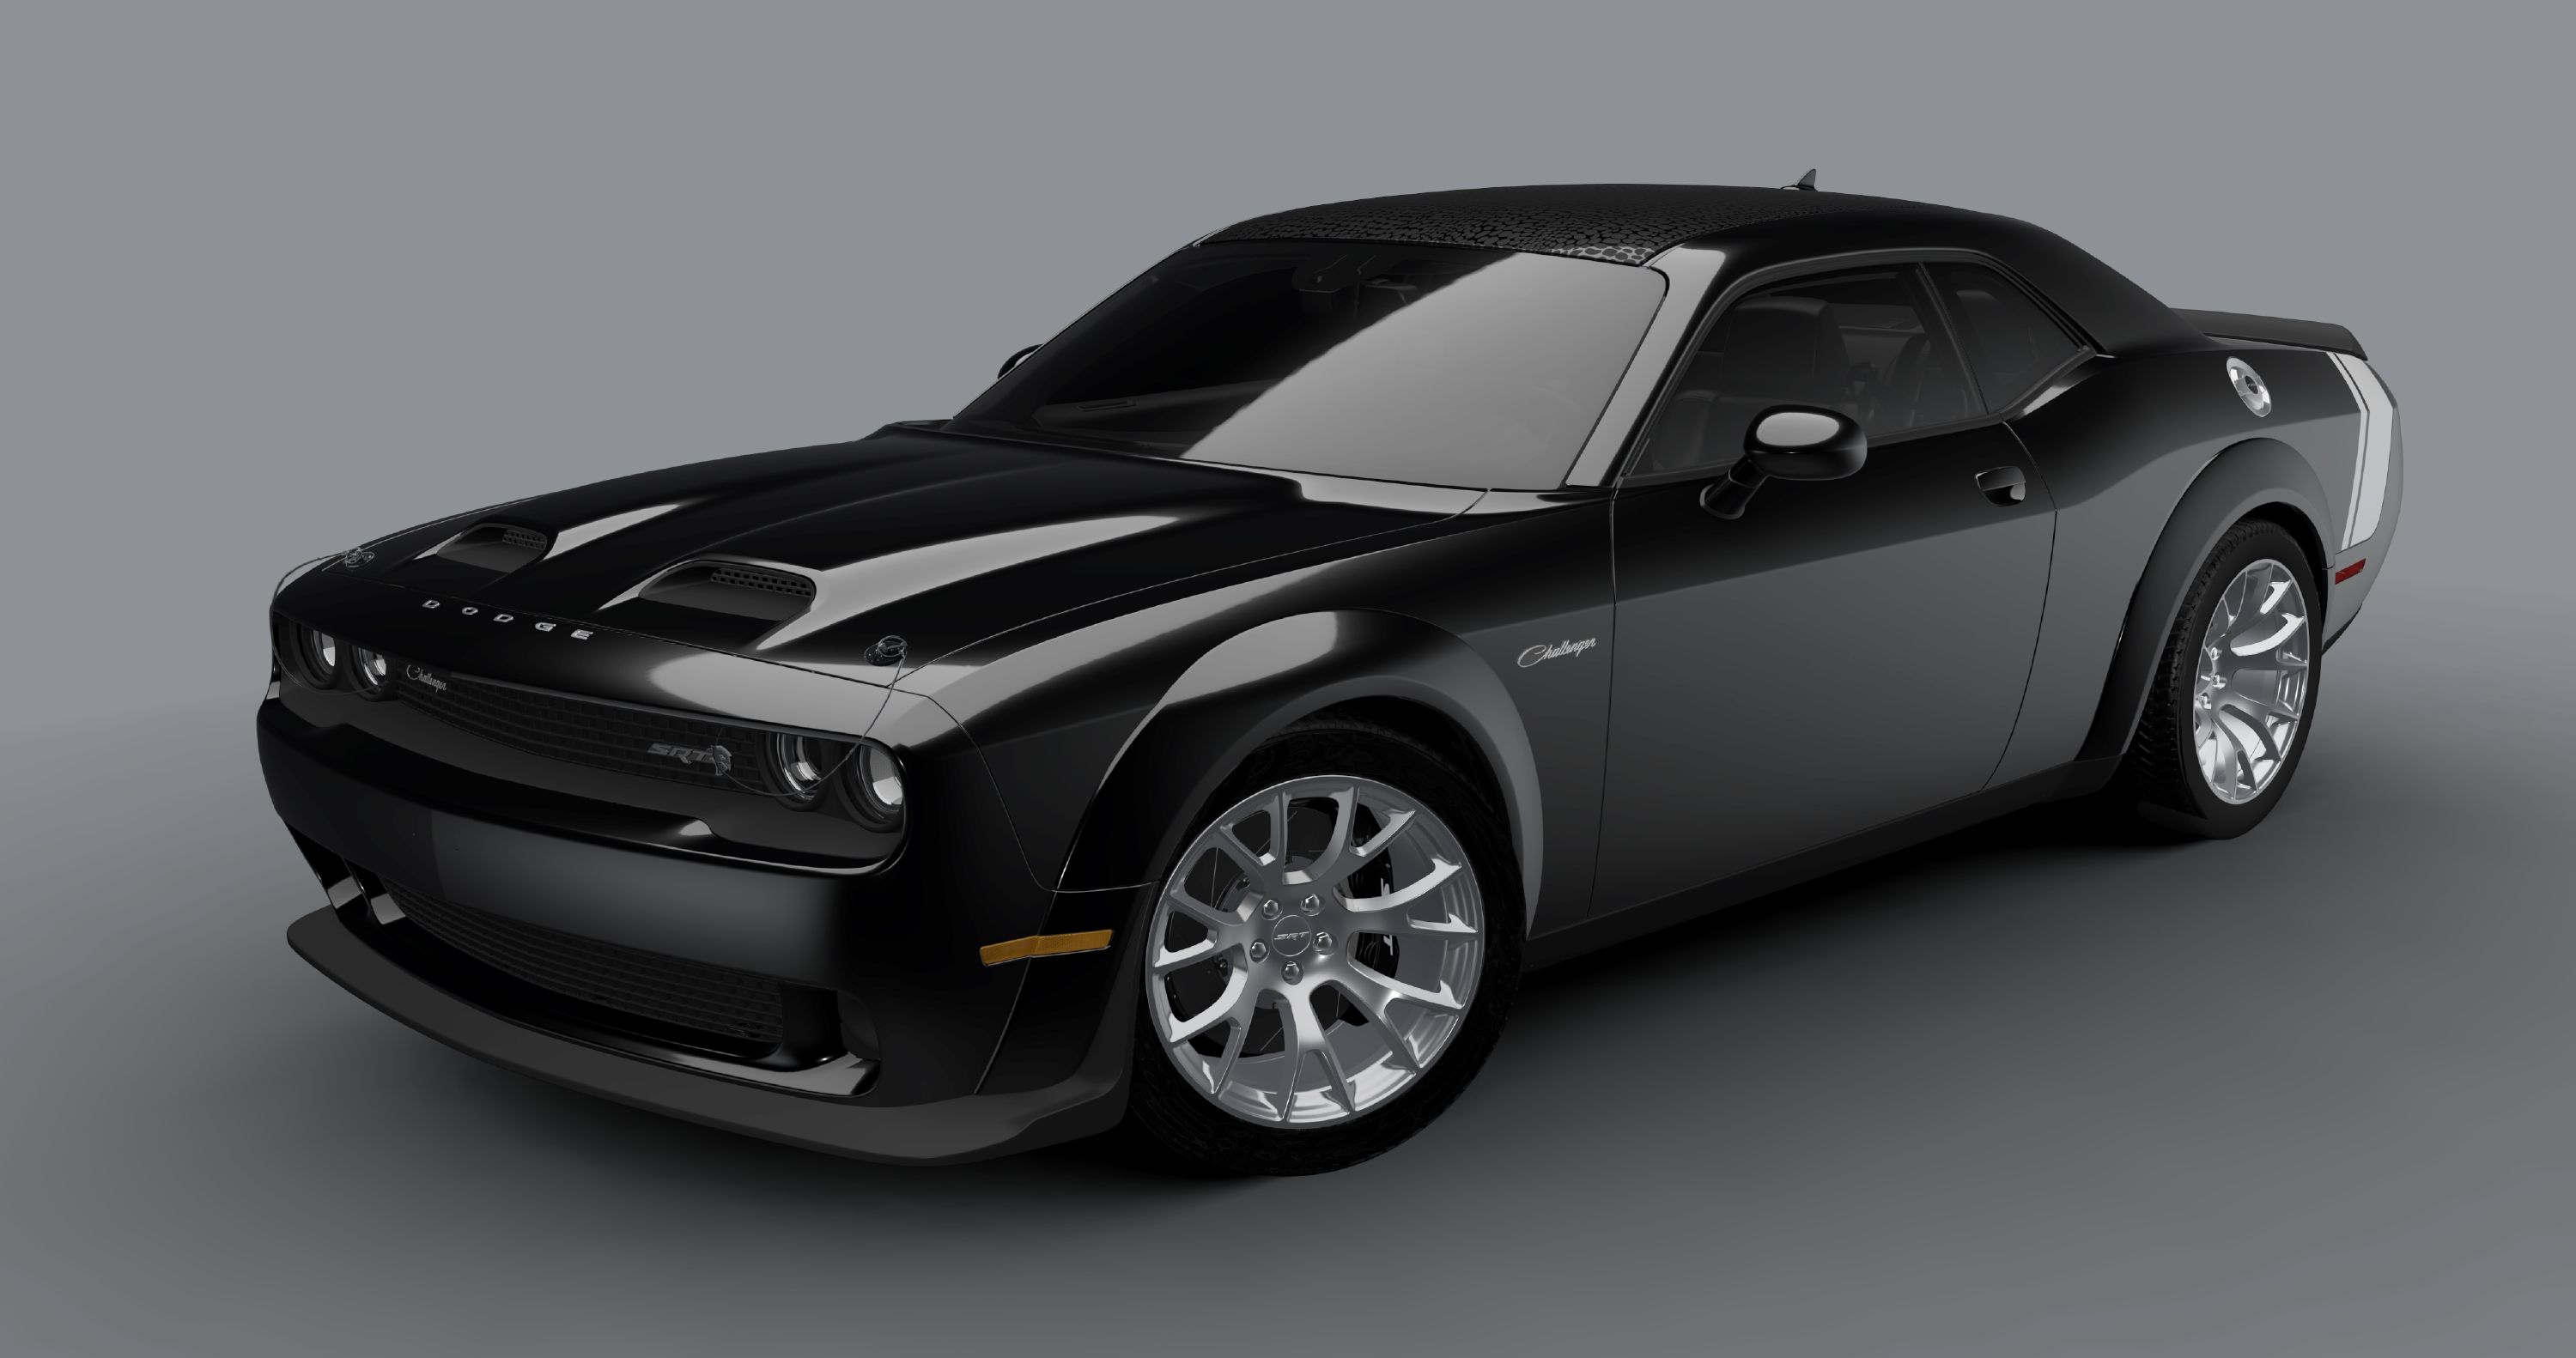 Dodge Celebrates Chargers and Challengers with Last Calls